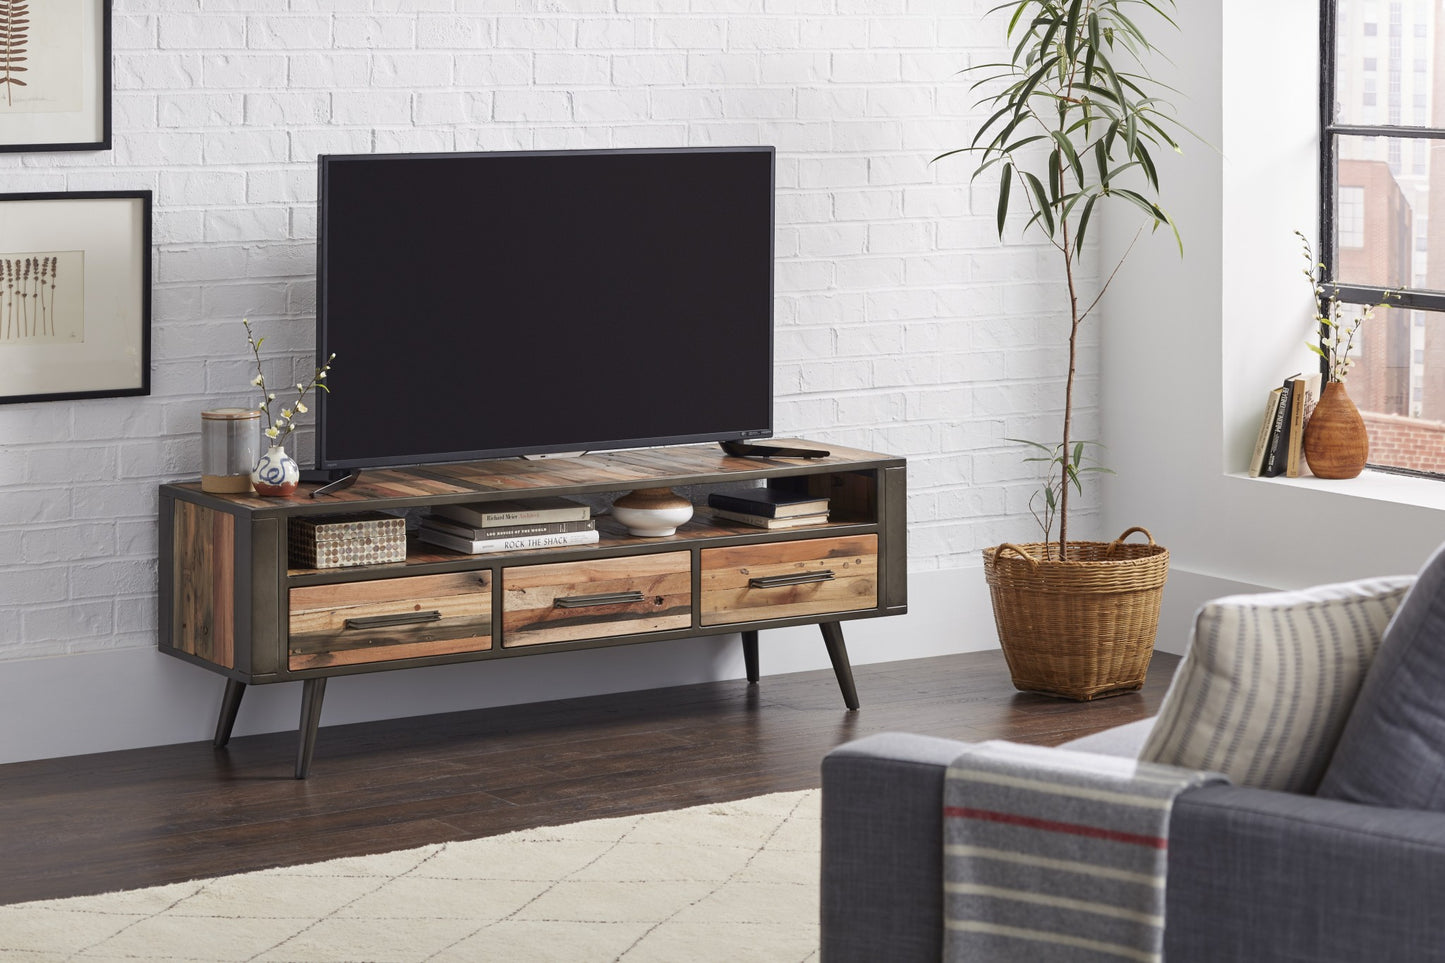 Rustic Natural Wood TV Stand with Three Drawers By Homeroots